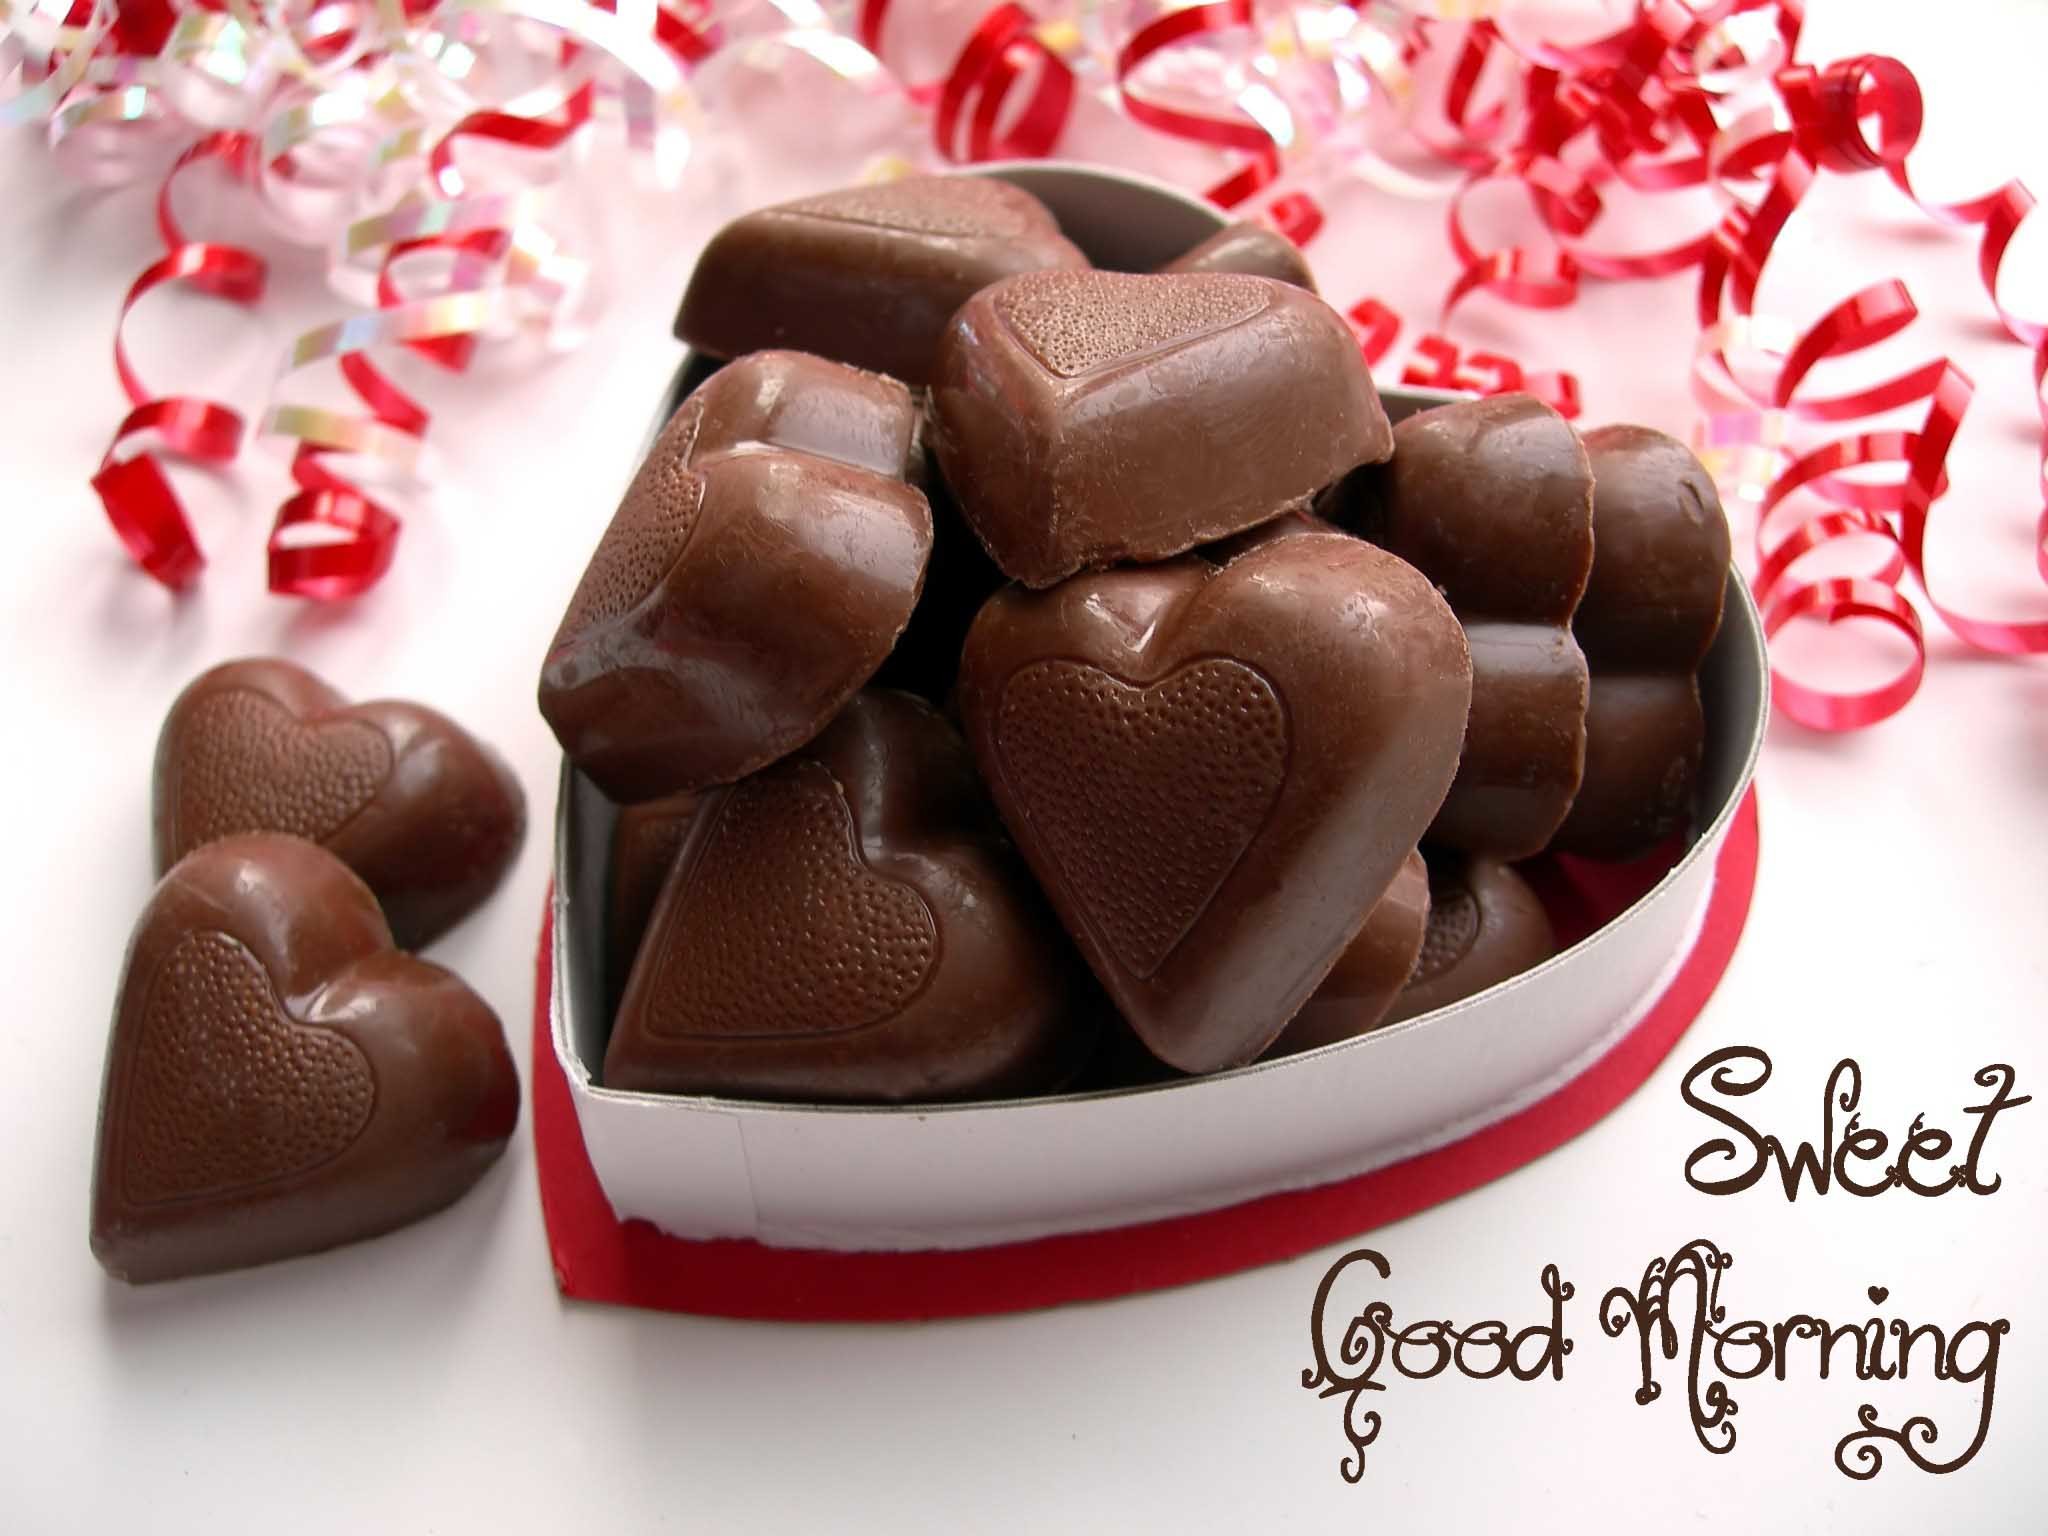 2048x1536 latest good morning wishes with sweets and choco image wallpaper .